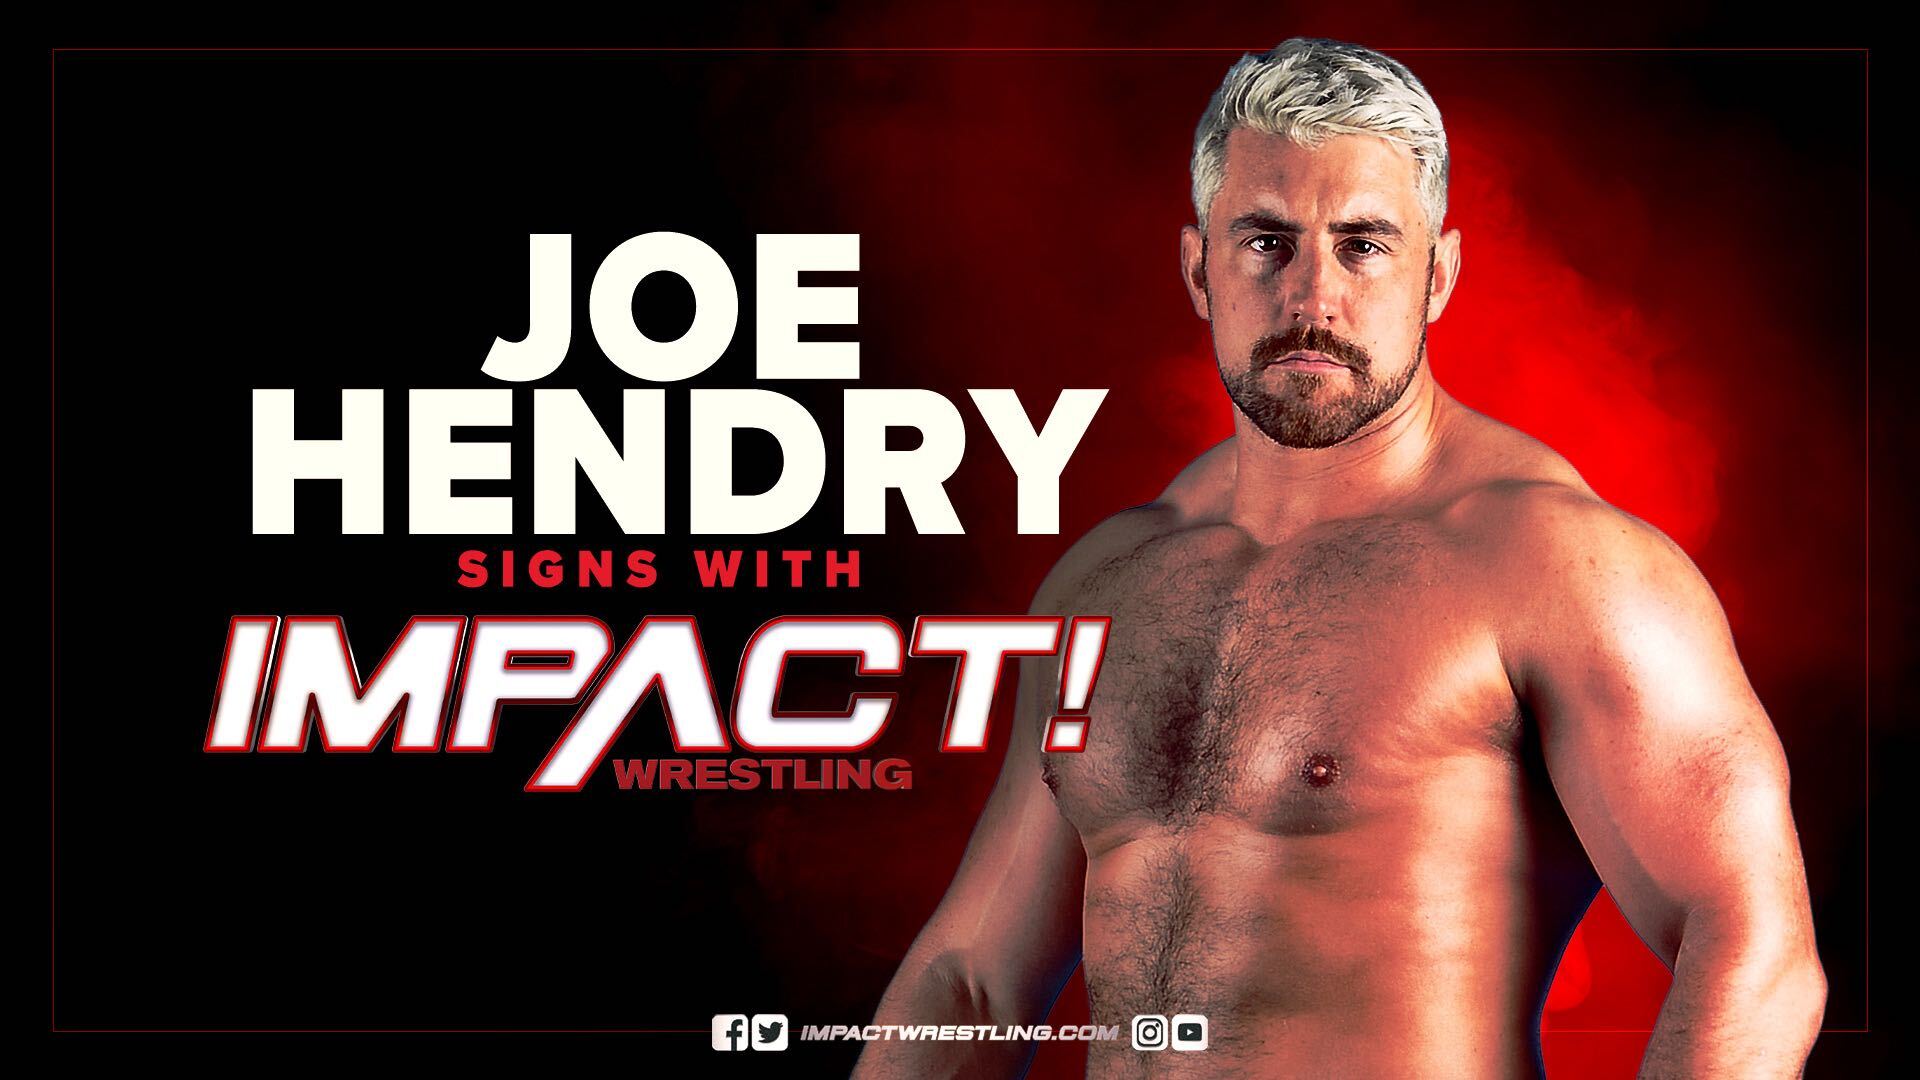 Joe Hendry Signs With IMPACT Wrestling